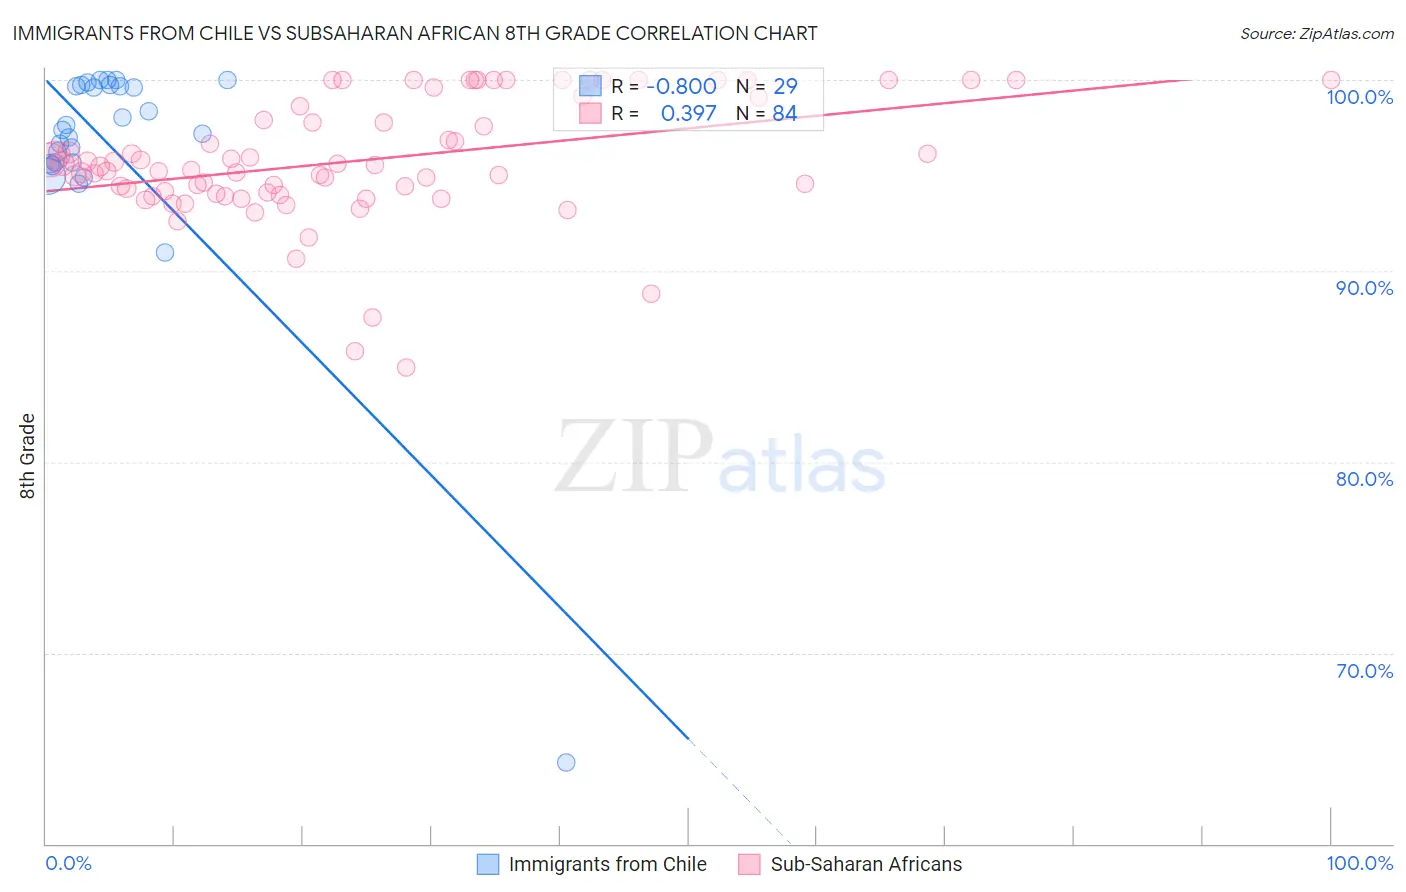 Immigrants from Chile vs Subsaharan African 8th Grade